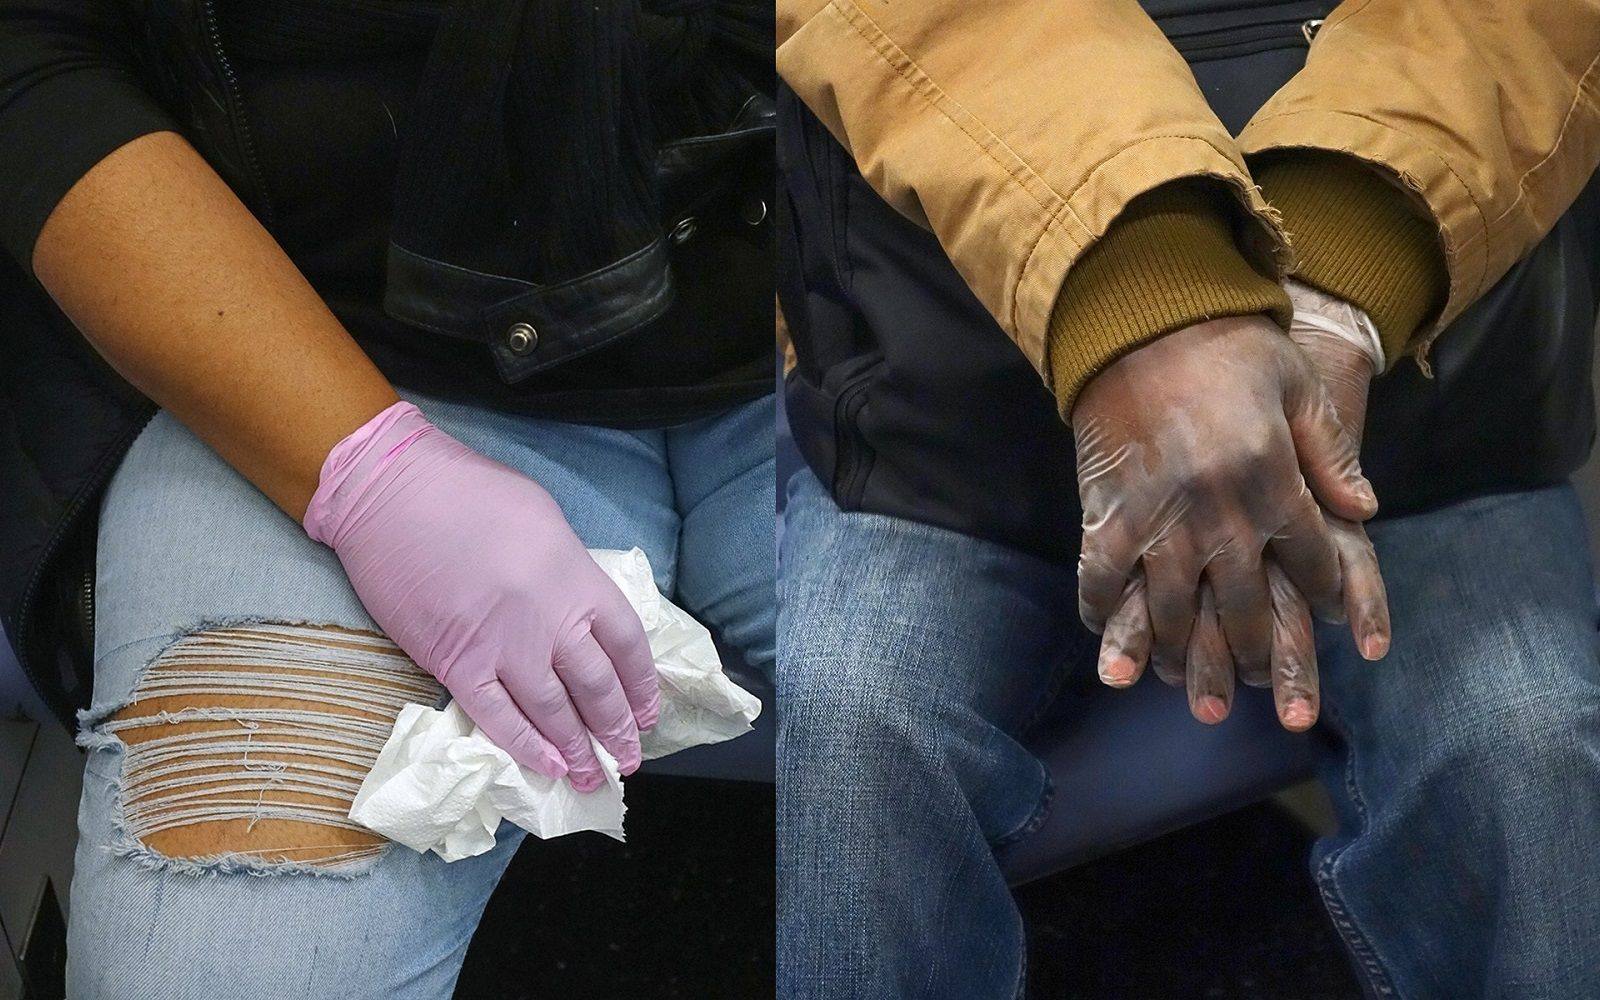 @subwayhands: the epidemic through the hands of New Yorkers The Coronavirus anxiety in Hannah La Follette Ryan's shots